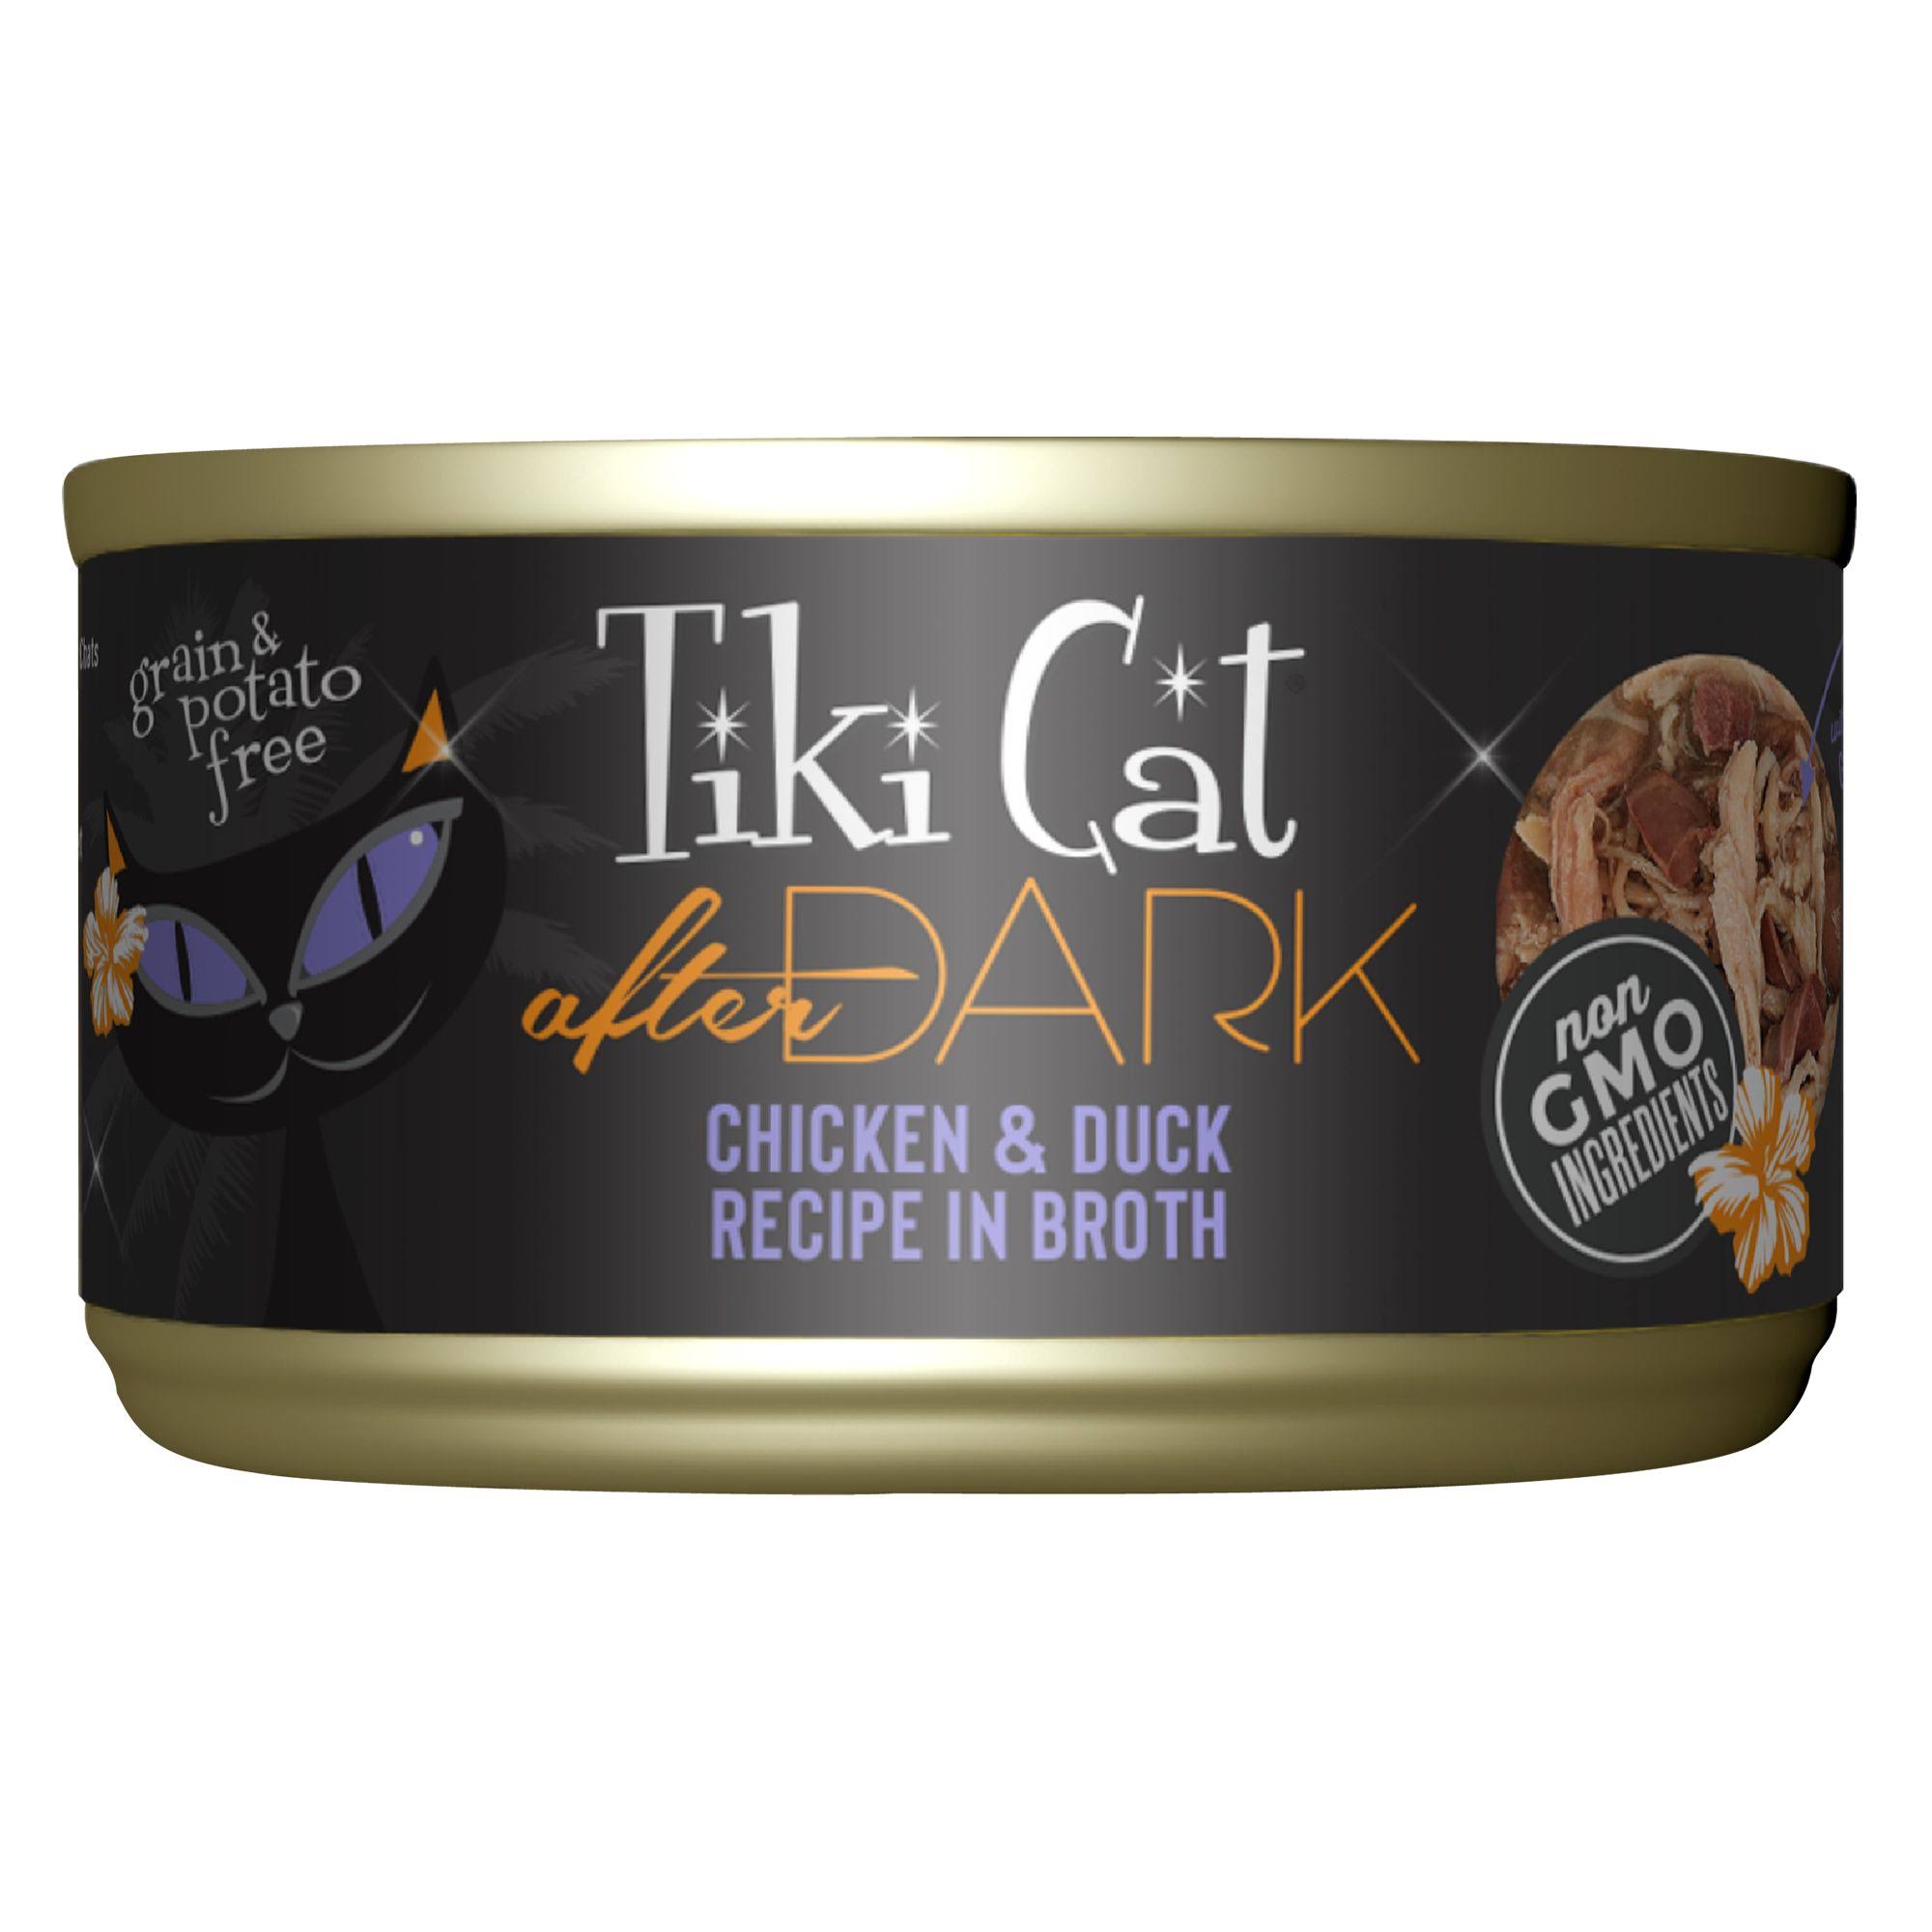 Tiki Cat After Dark Cat Food - Chicken and Duck, 2.8oz, 12 Pack